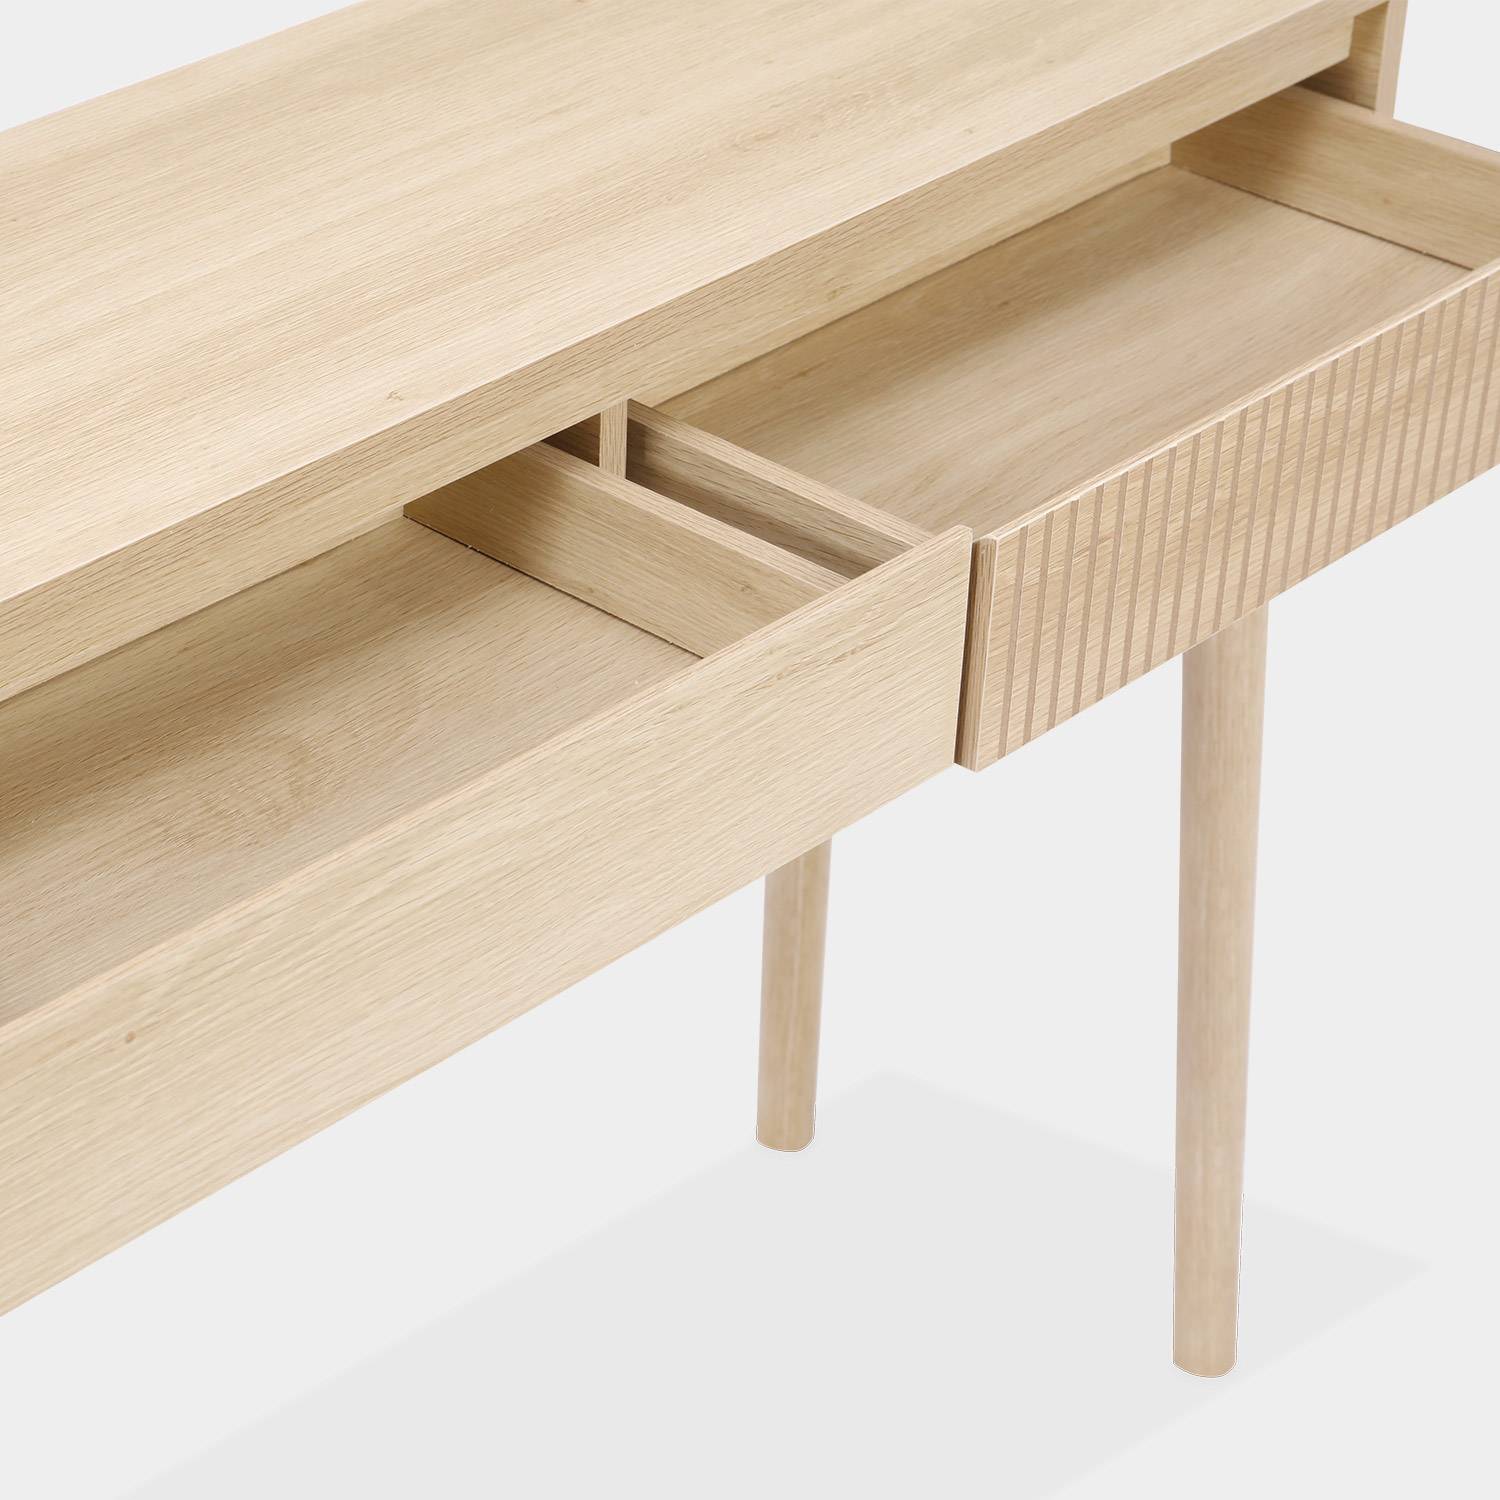 Grooved wood detail console table, 100x30x75cm, Linear, Natural wood colour,sweeek,Photo6